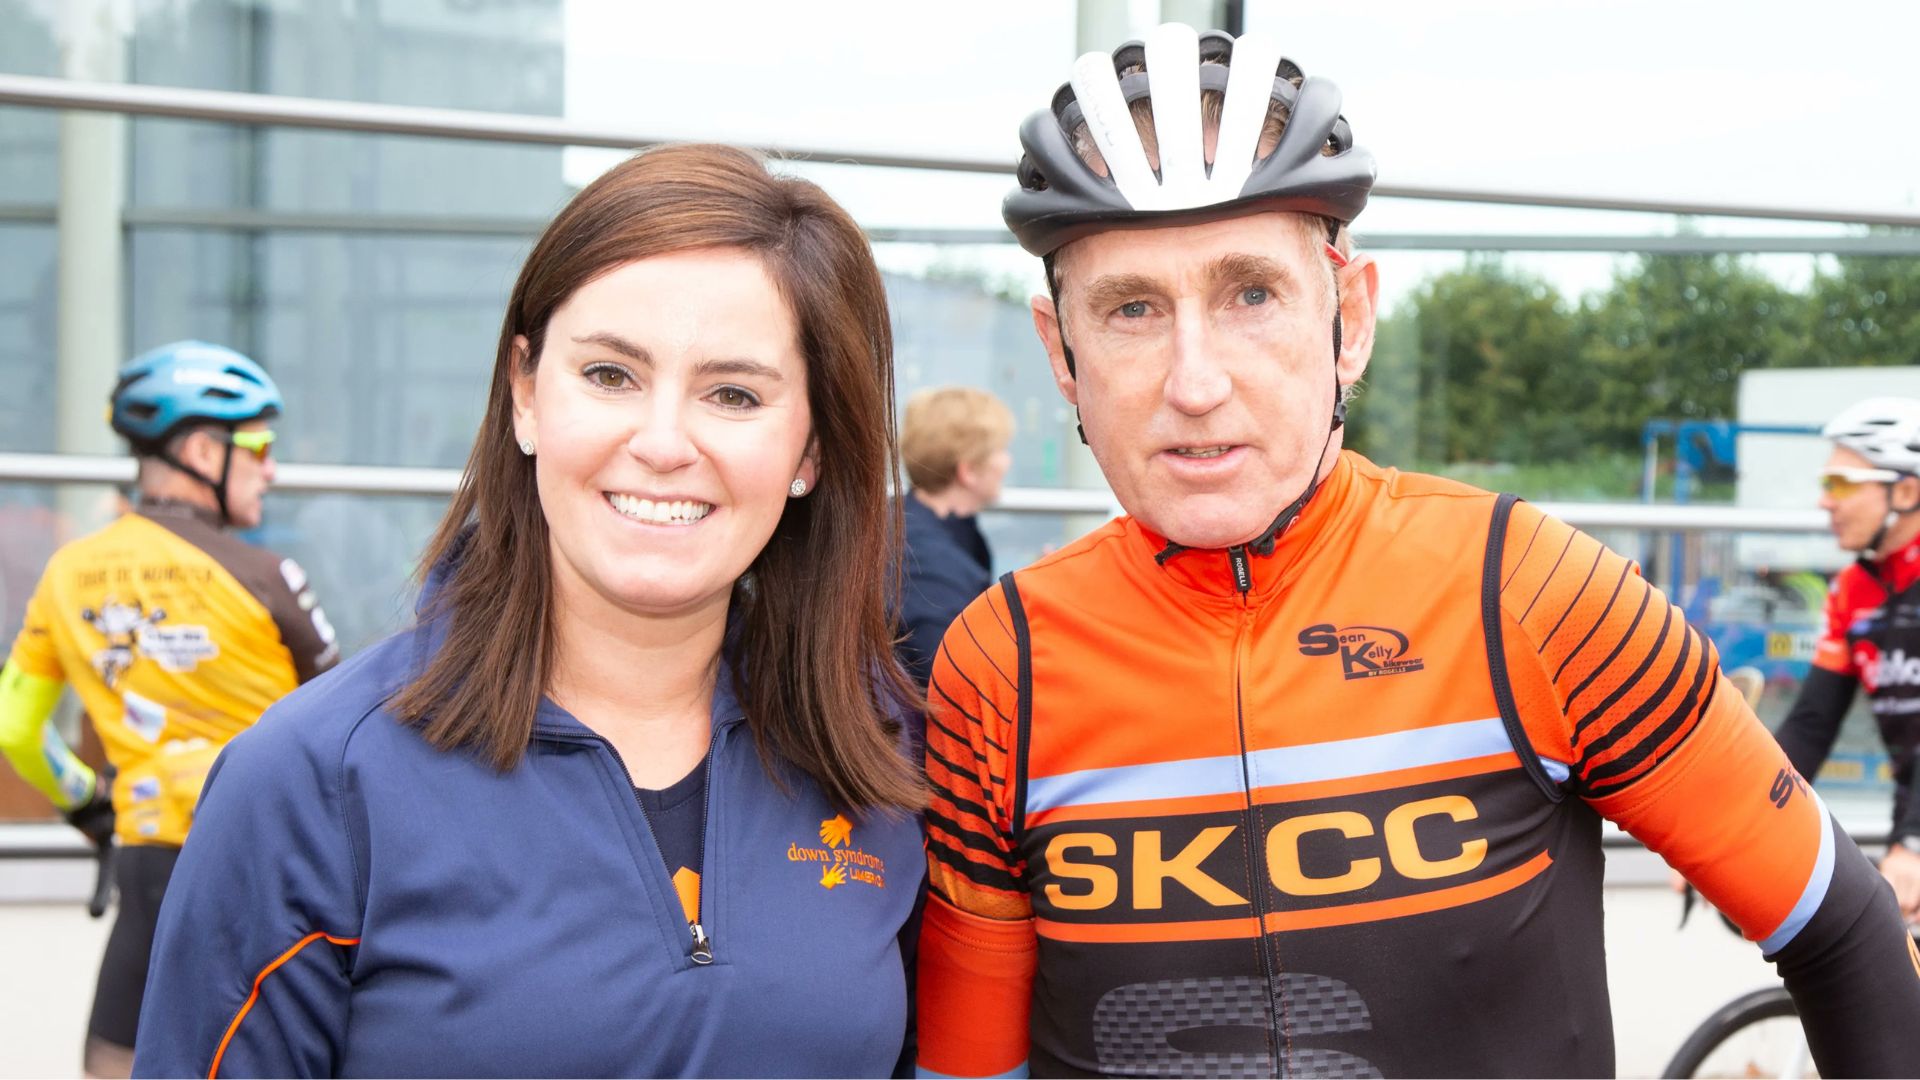 Sean Kelly Three Counties Cycle will take place on Sunday, September 18 in aid of Down Syndrome Limerick